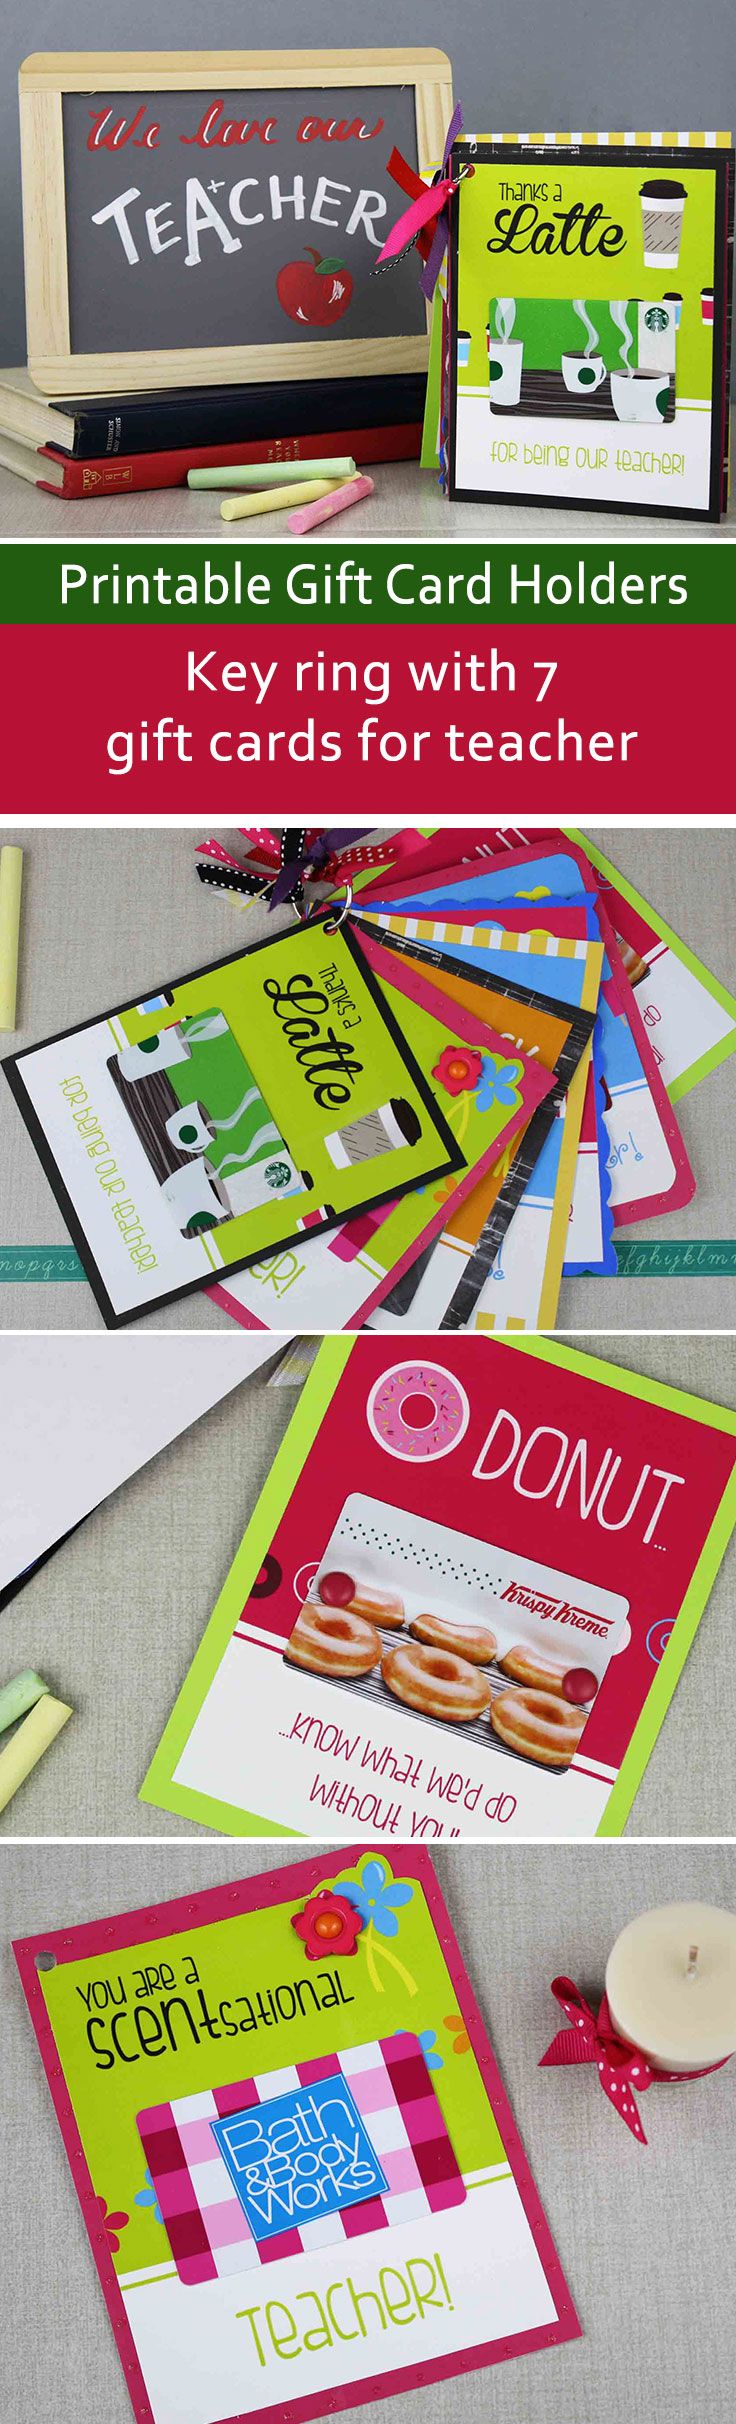 This key ring full of gift cards for teacher is perfect for teacher appreciation...